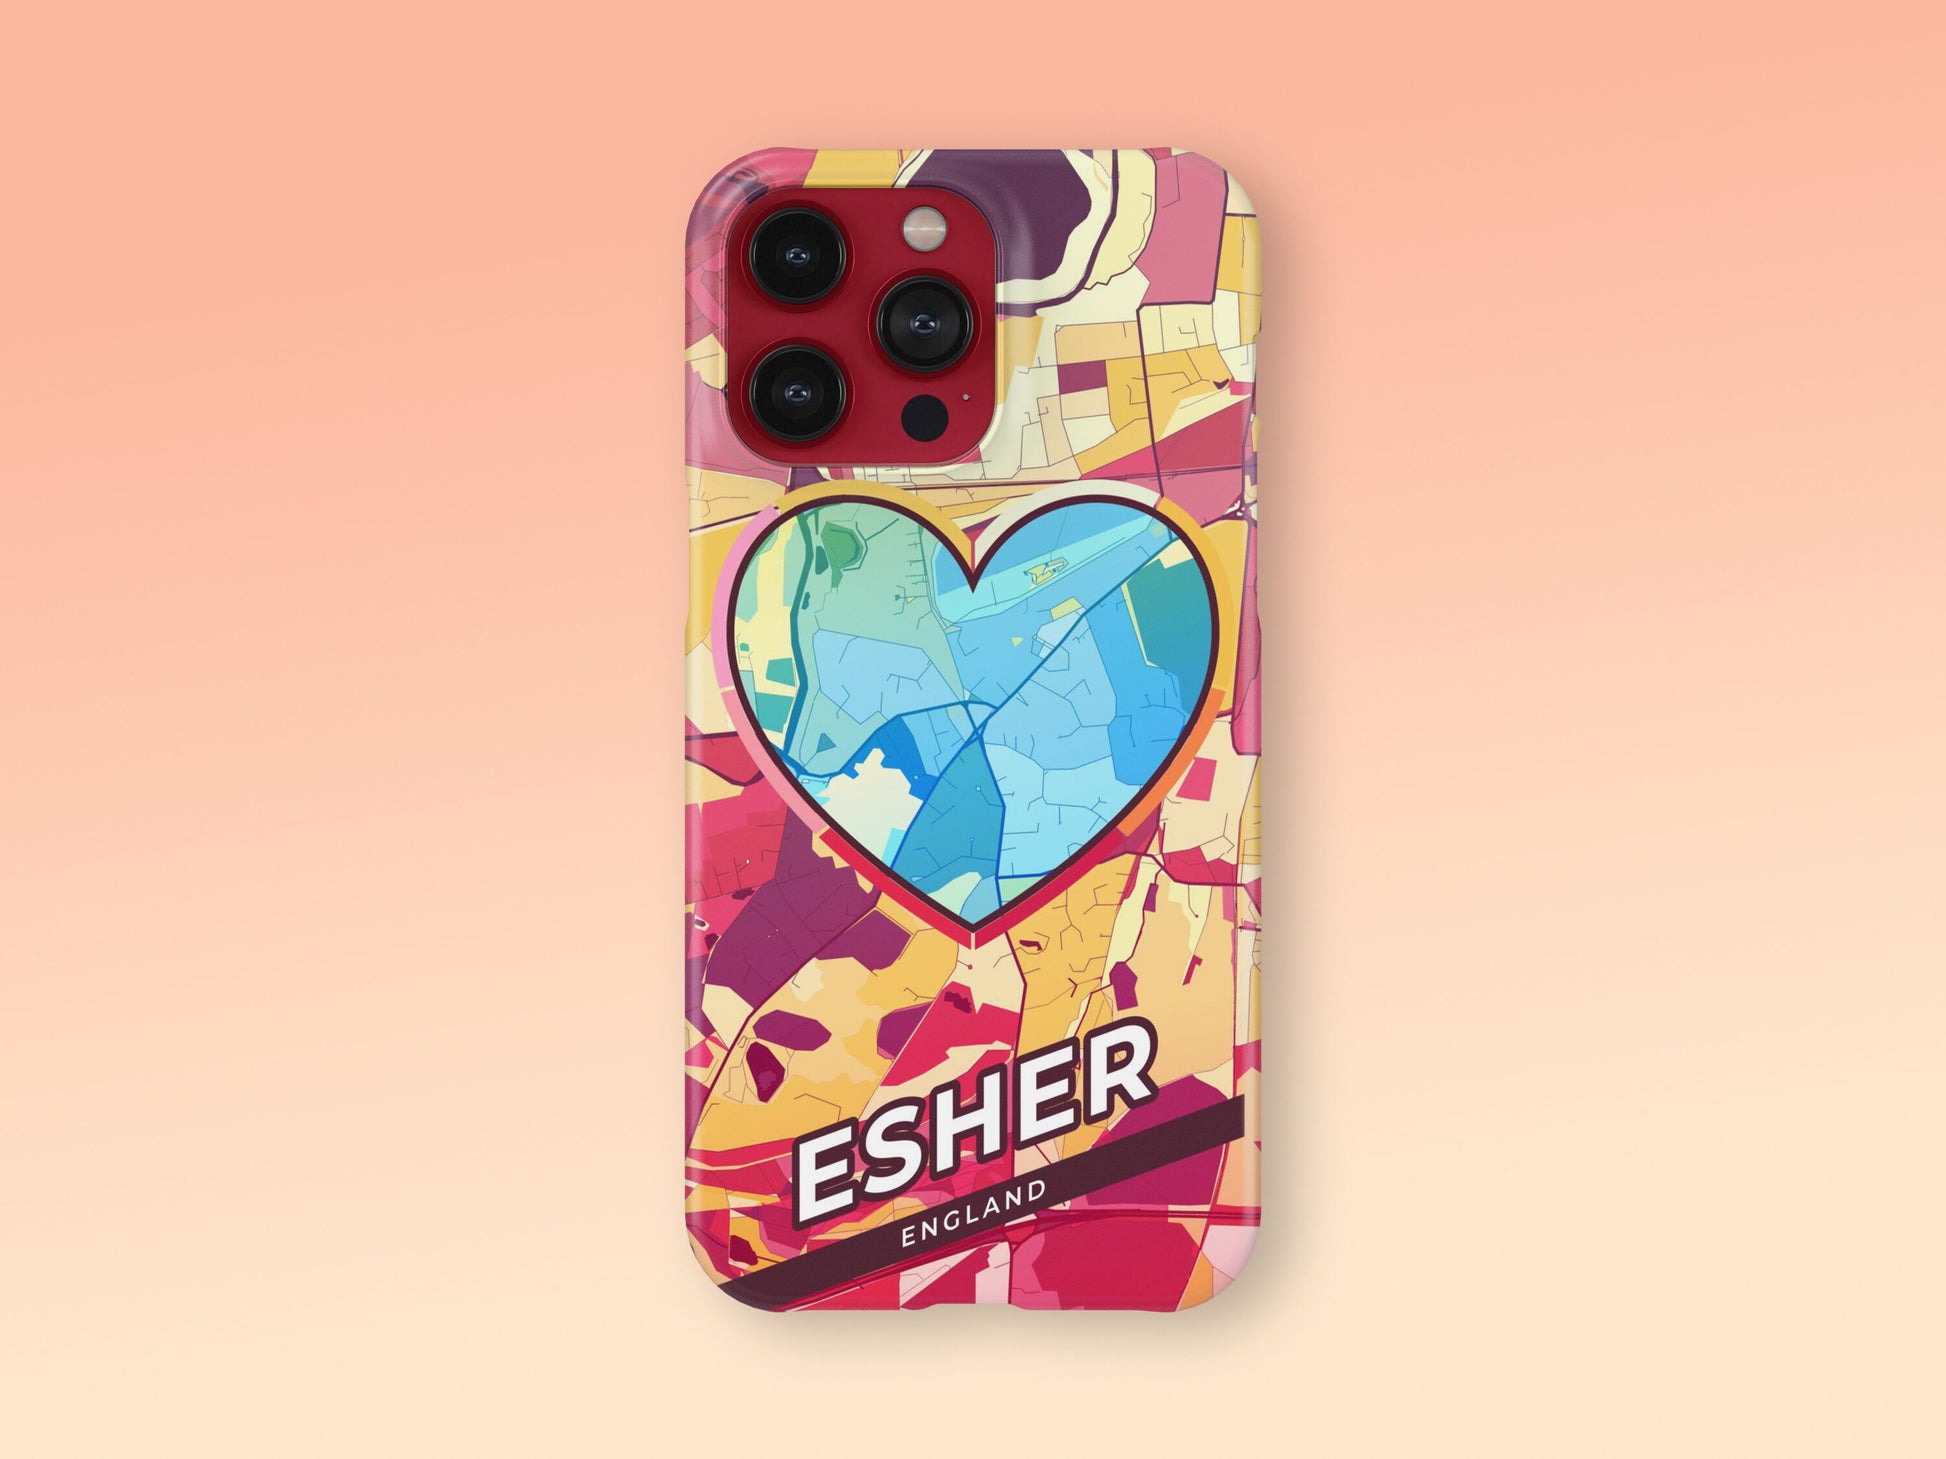 Esher England slim phone case with colorful icon. Birthday, wedding or housewarming gift. Couple match cases. 2